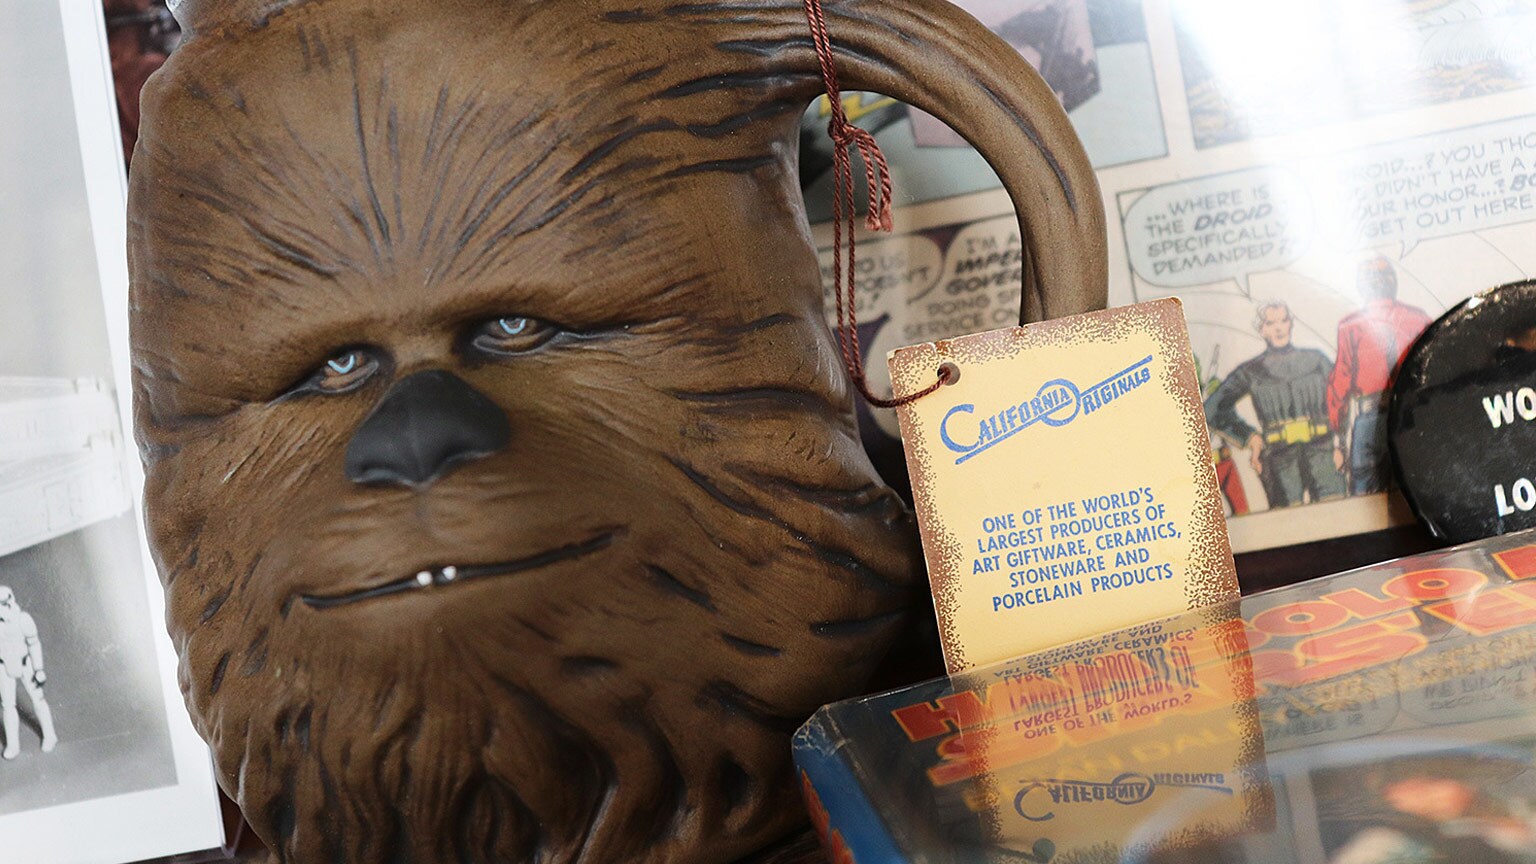 This Majestic Wookiee Mug, One of the First Star Wars Collectibles, Still Impresses